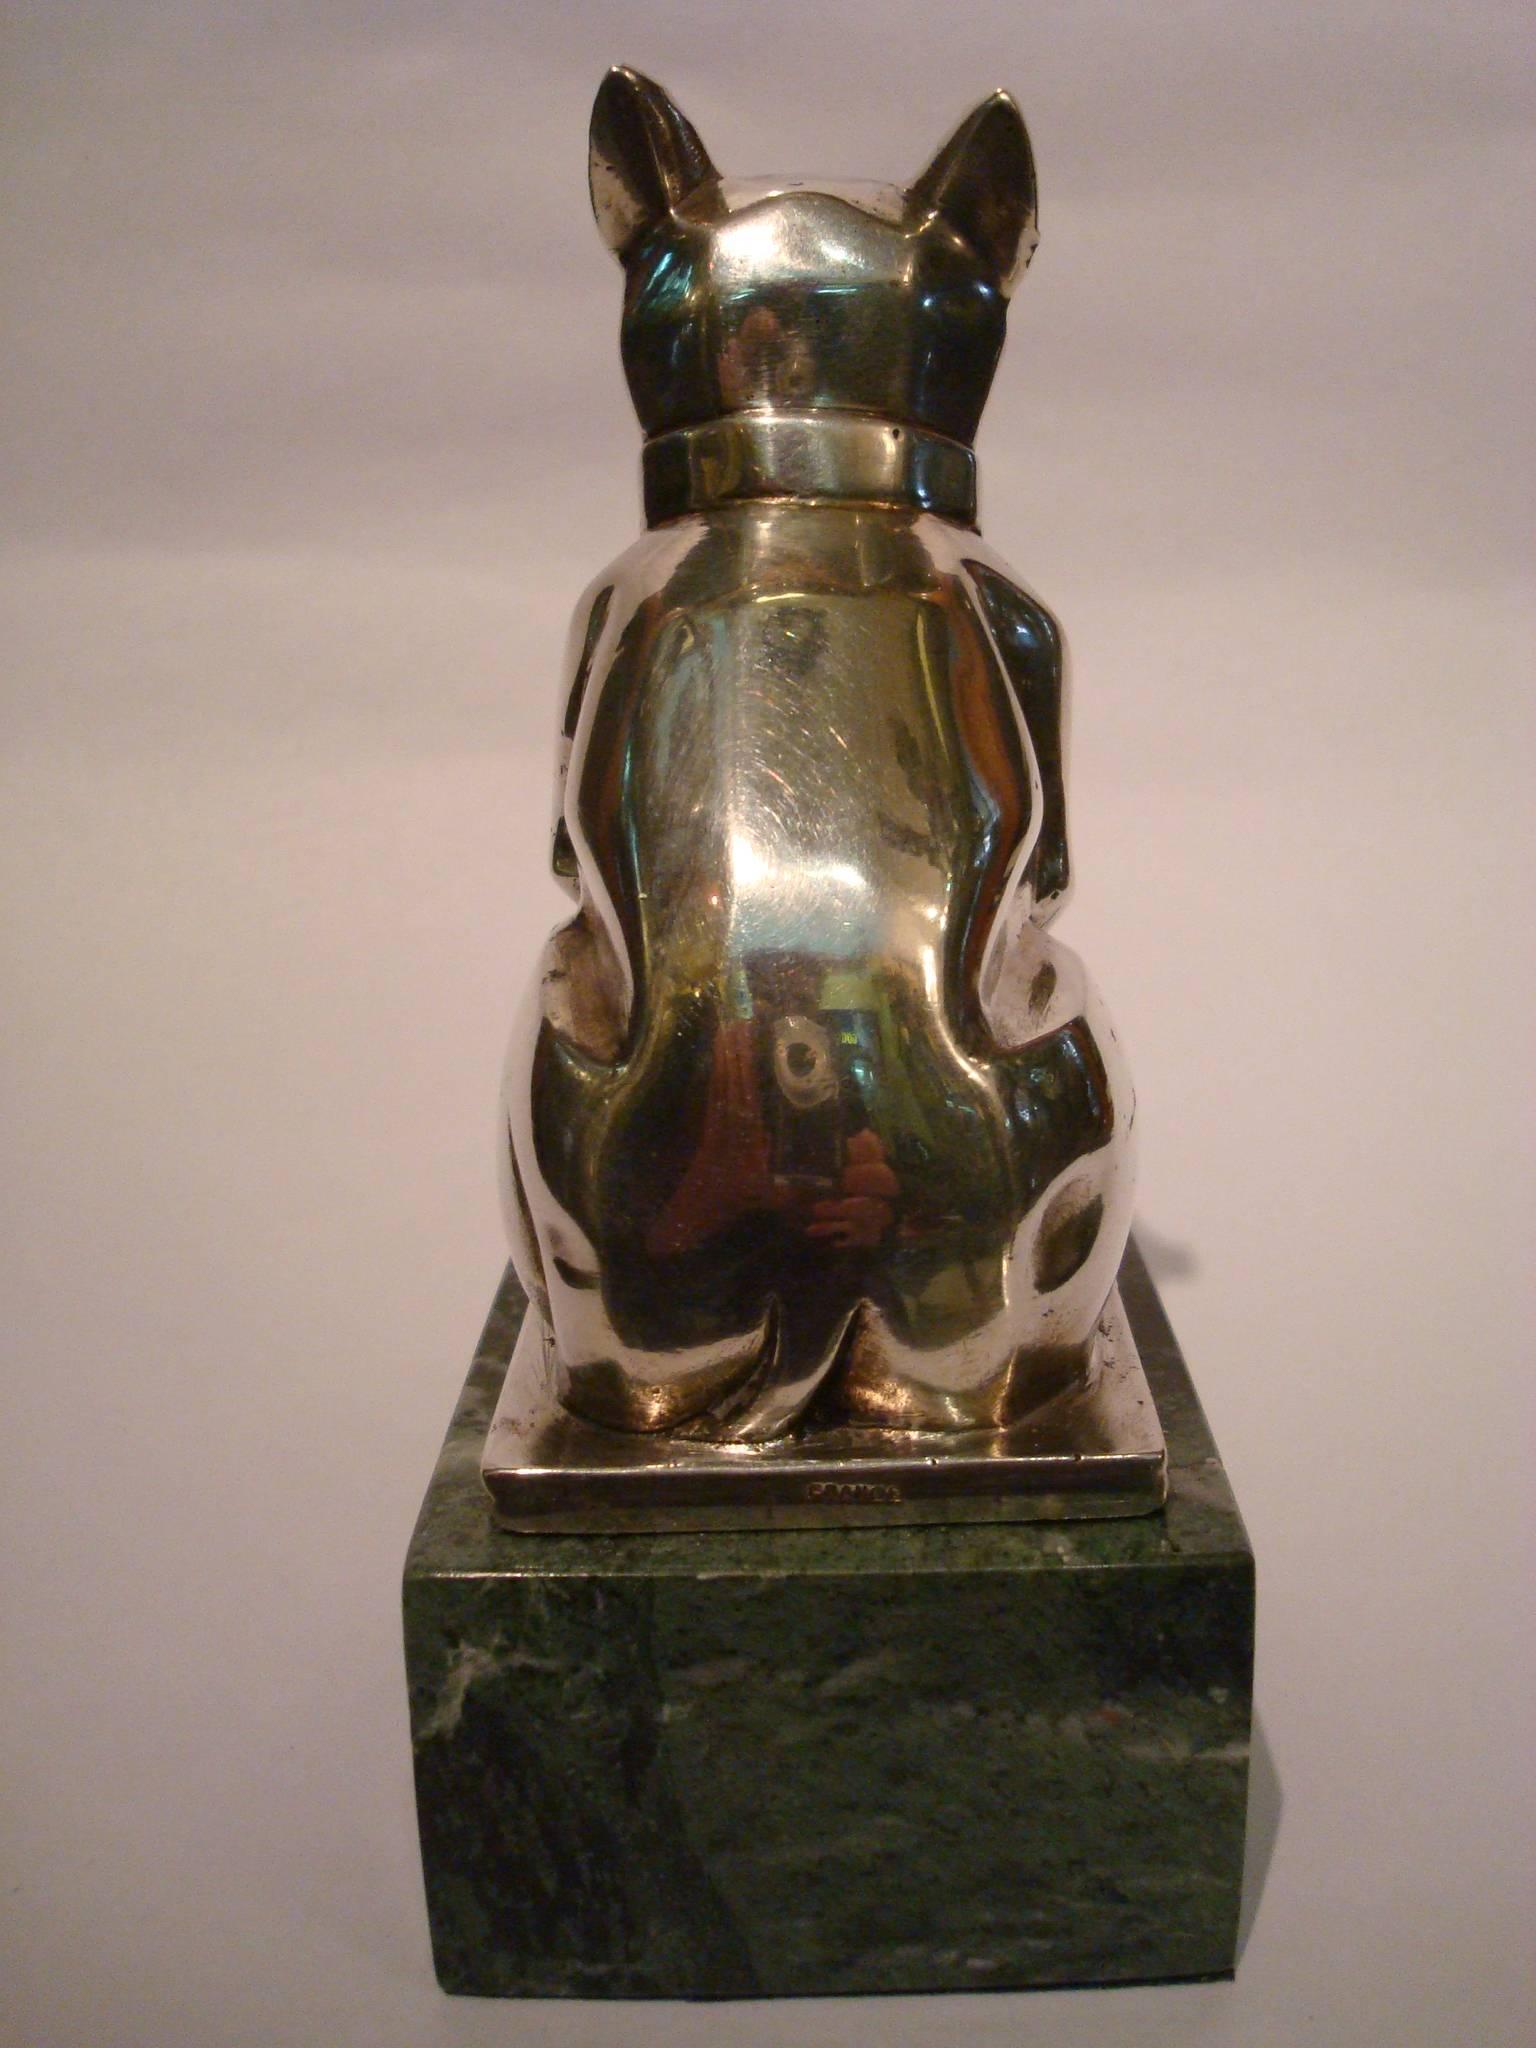 Bronze Art Deco French Bulldog Bookend or Paperweight, France, 1925